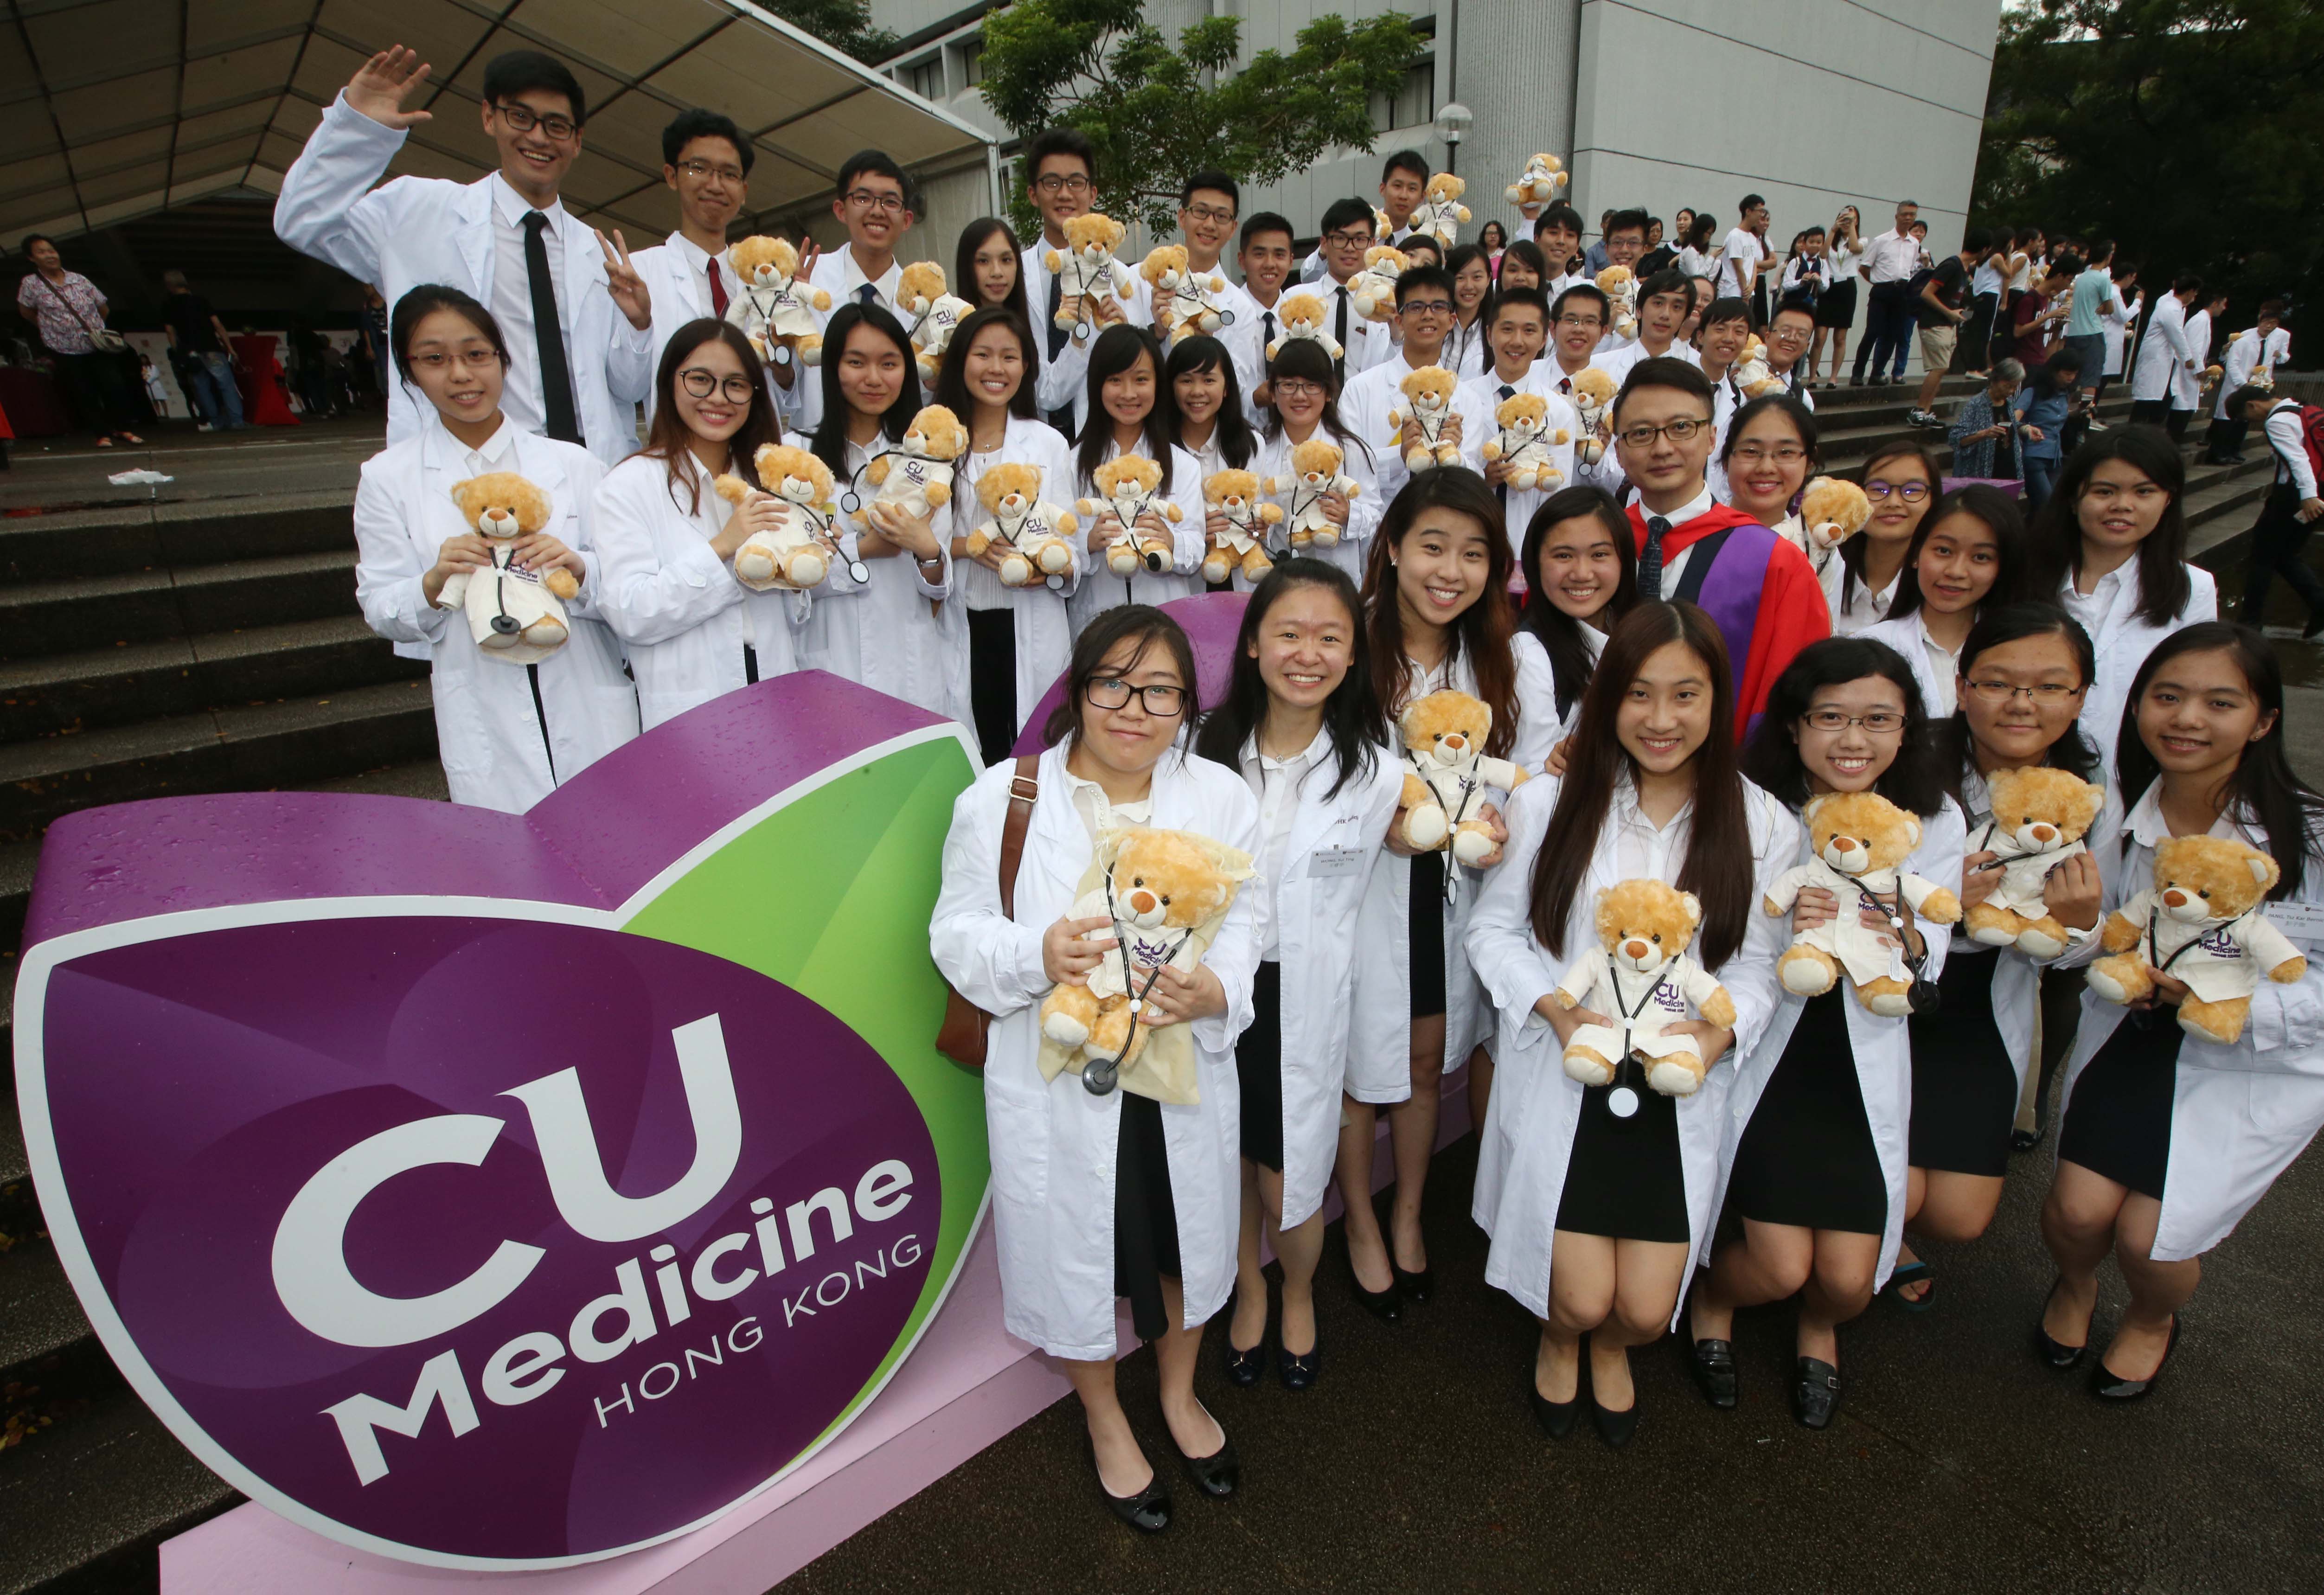 The Faculty of Medicine of CUHK commits to nurturing medical students with the highest standards